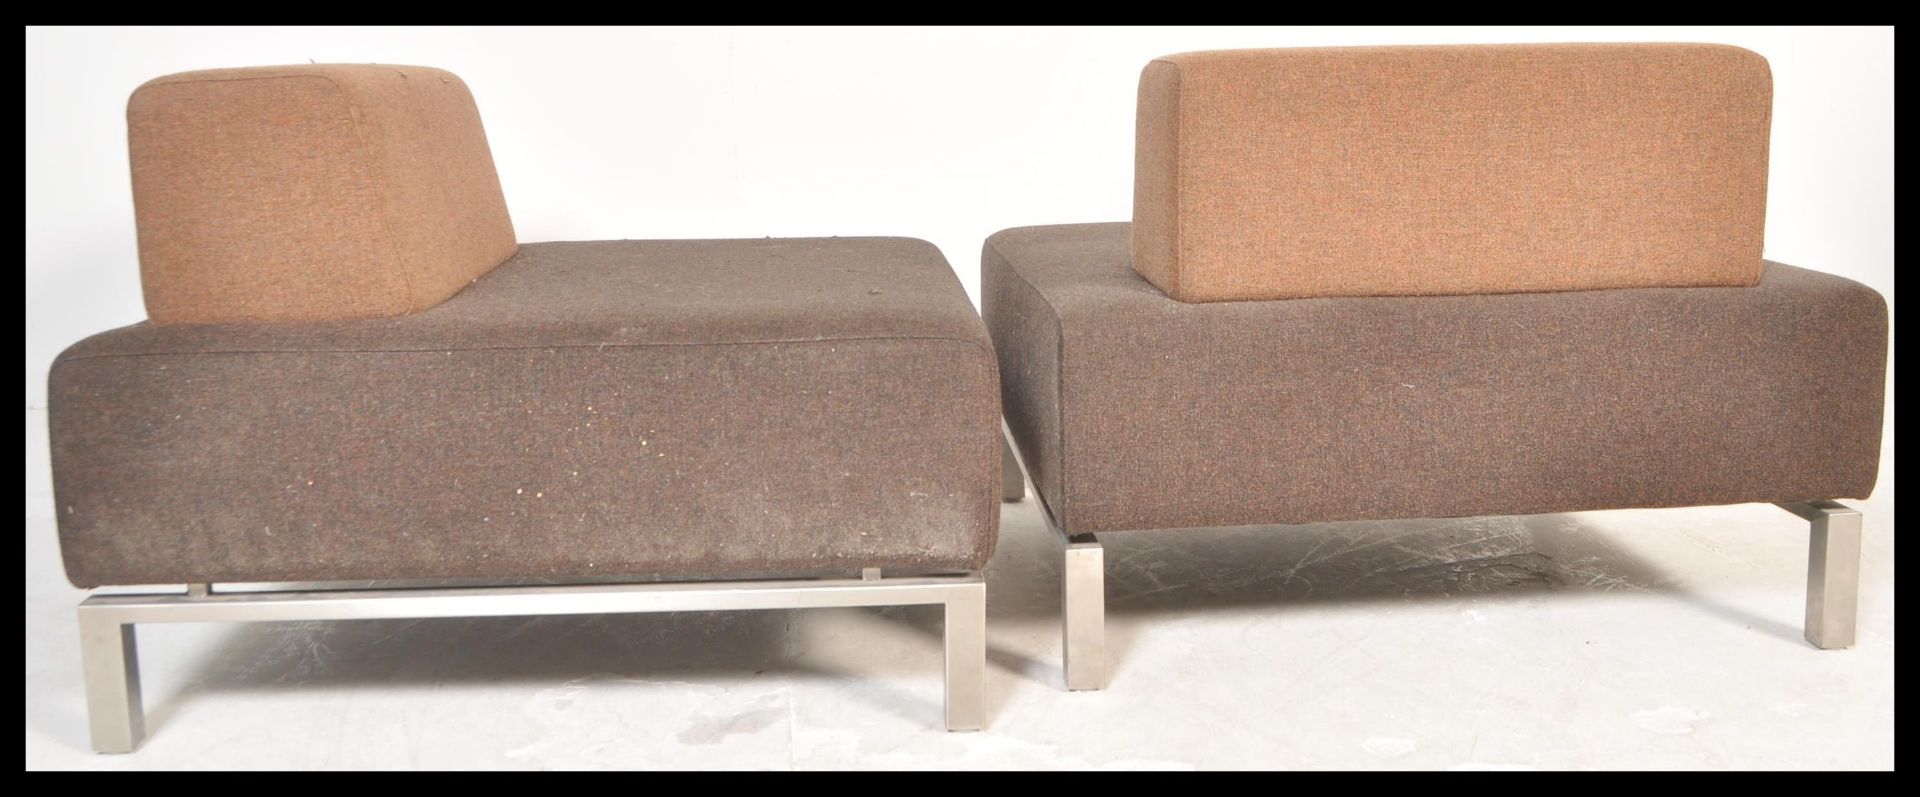 A pair of contemporary modern modular seating sofa / chairs in the manner of Orange Box furniture - Image 5 of 5